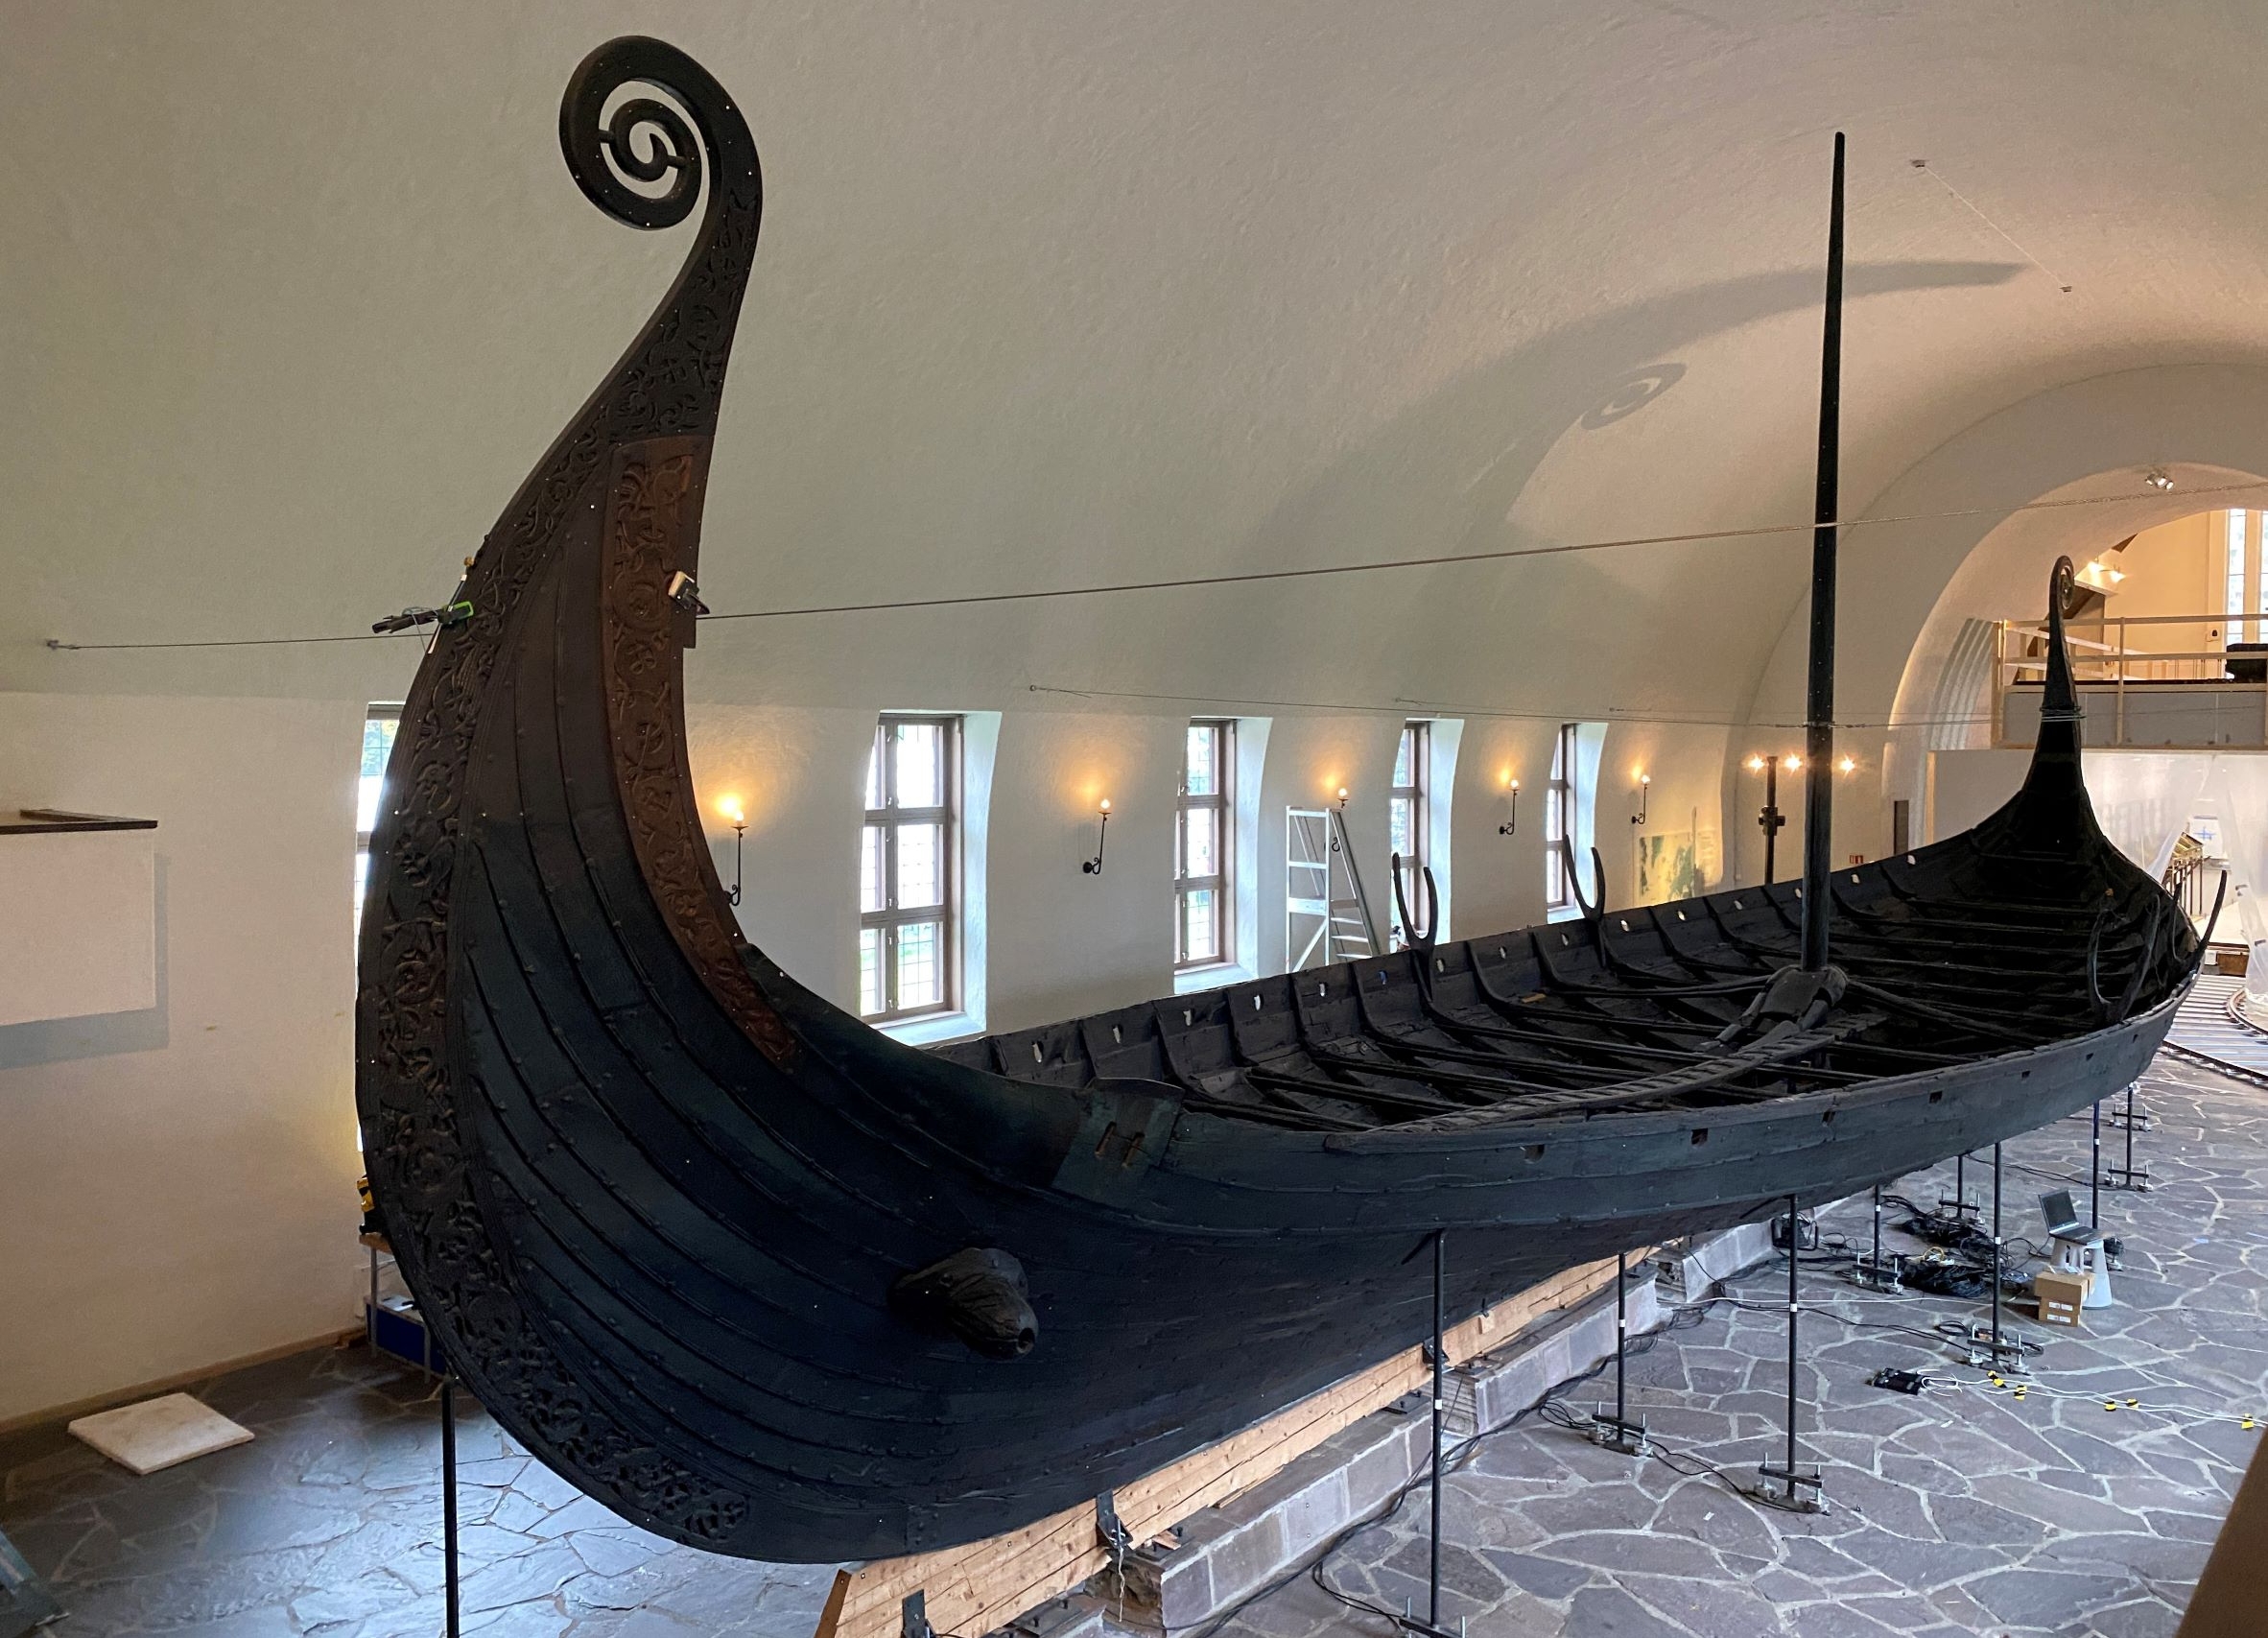 Millennium-Old Viking Ships Shored Up for Oslo Move